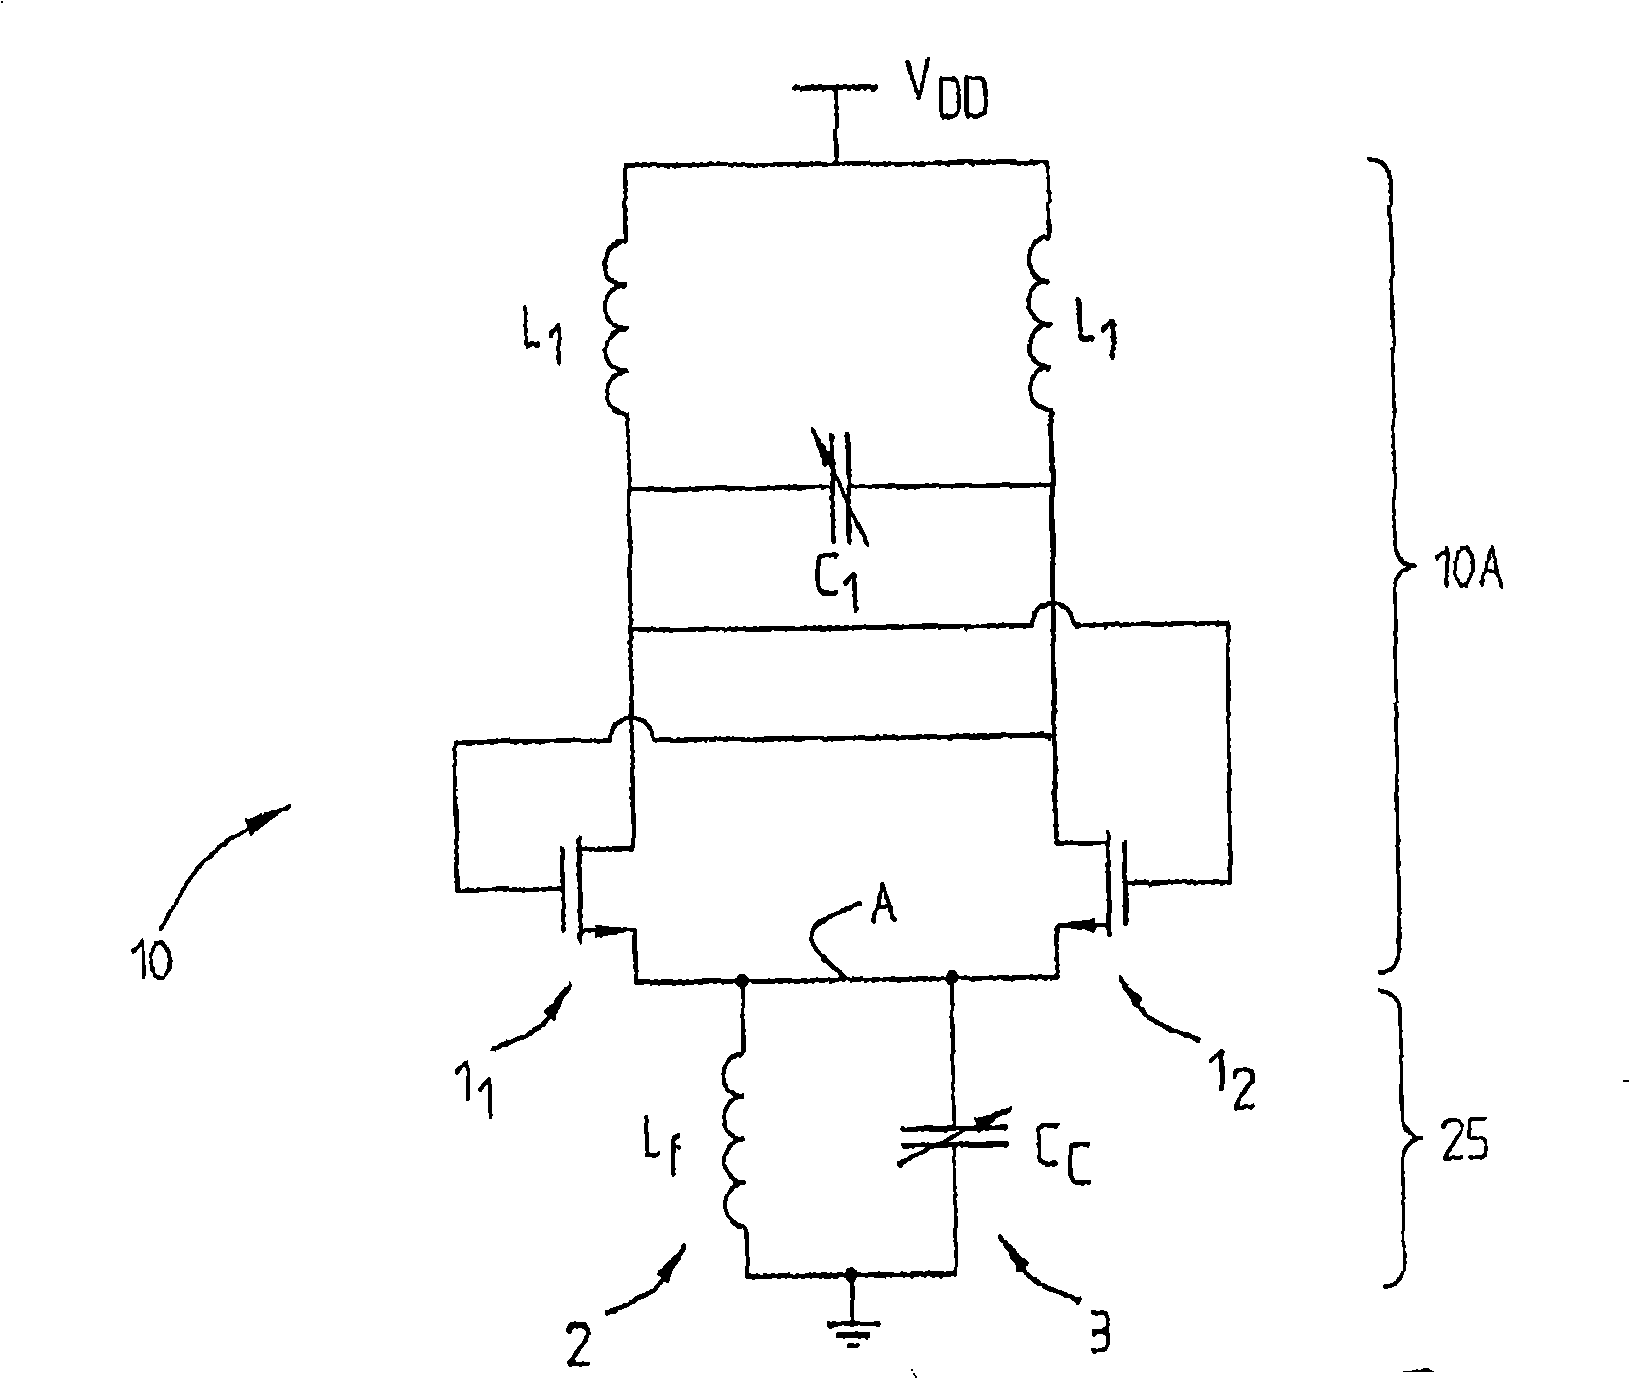 Oscillatory circuit of tunable filter with minimize phase noise